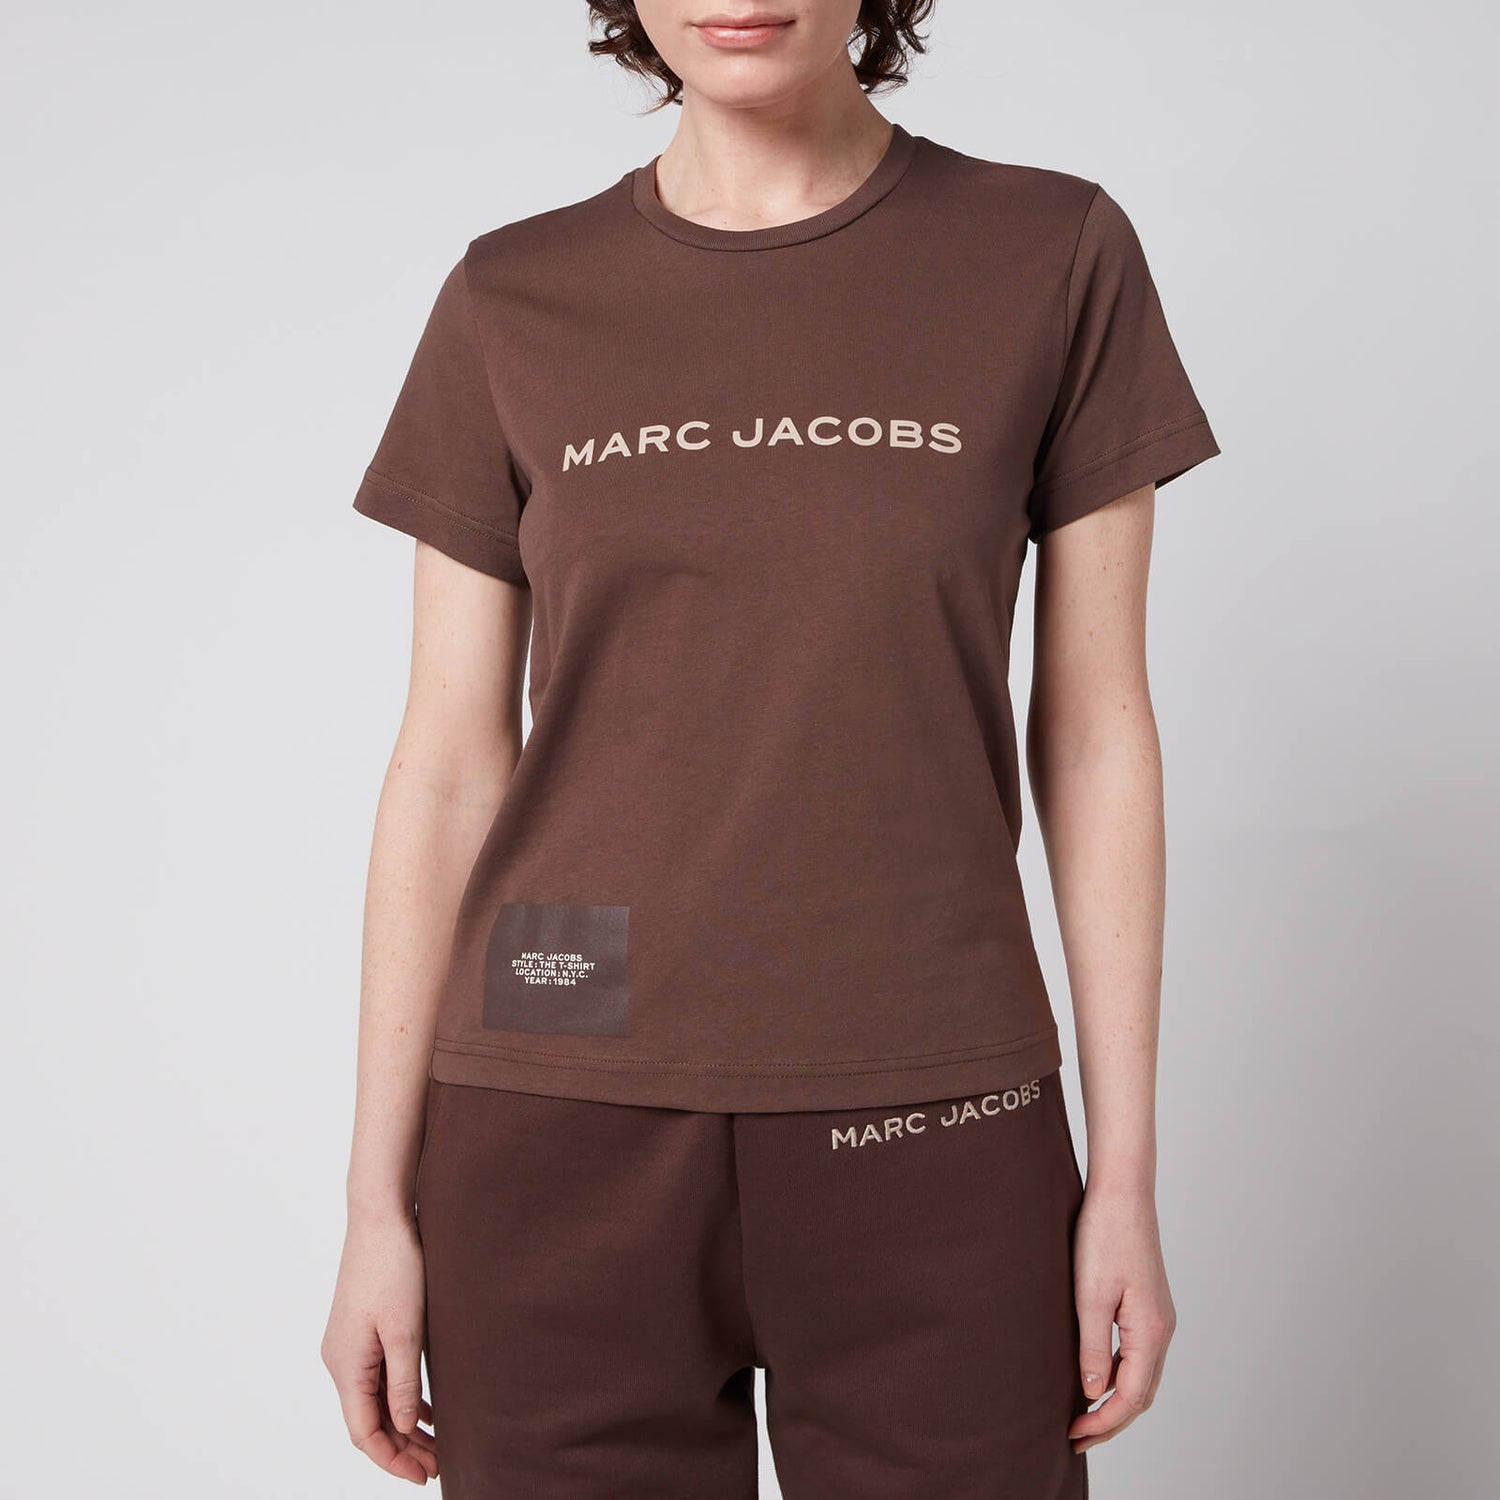 Marc Jacobs Women's The T-Shirt - Shaved Chocolate - XS